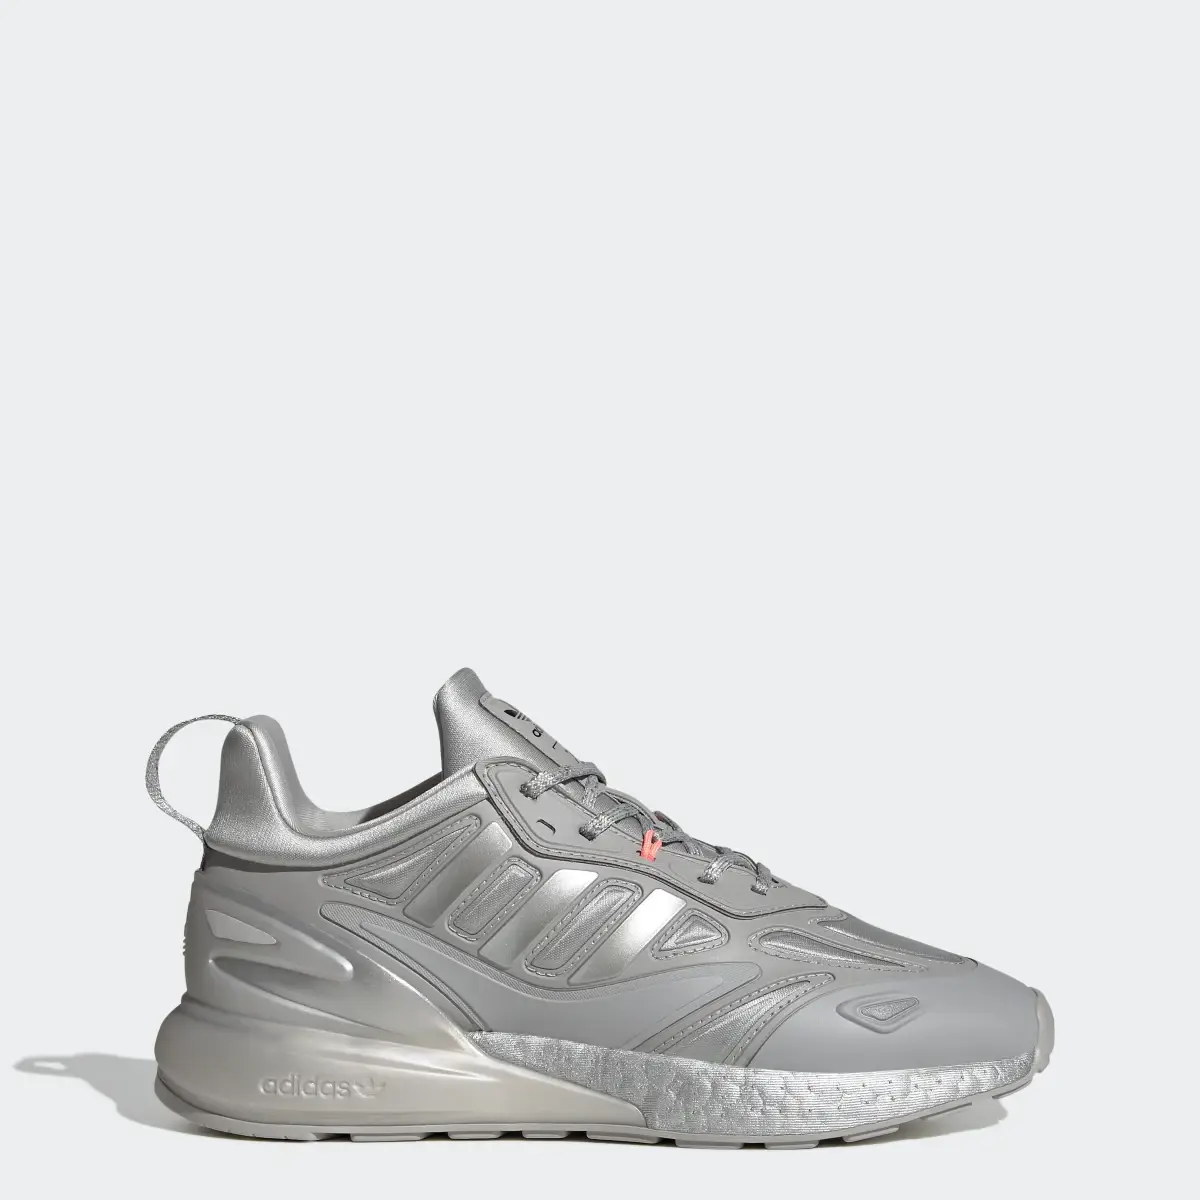 Adidas ZX 2K BOOST 2.0 Shoes. 1